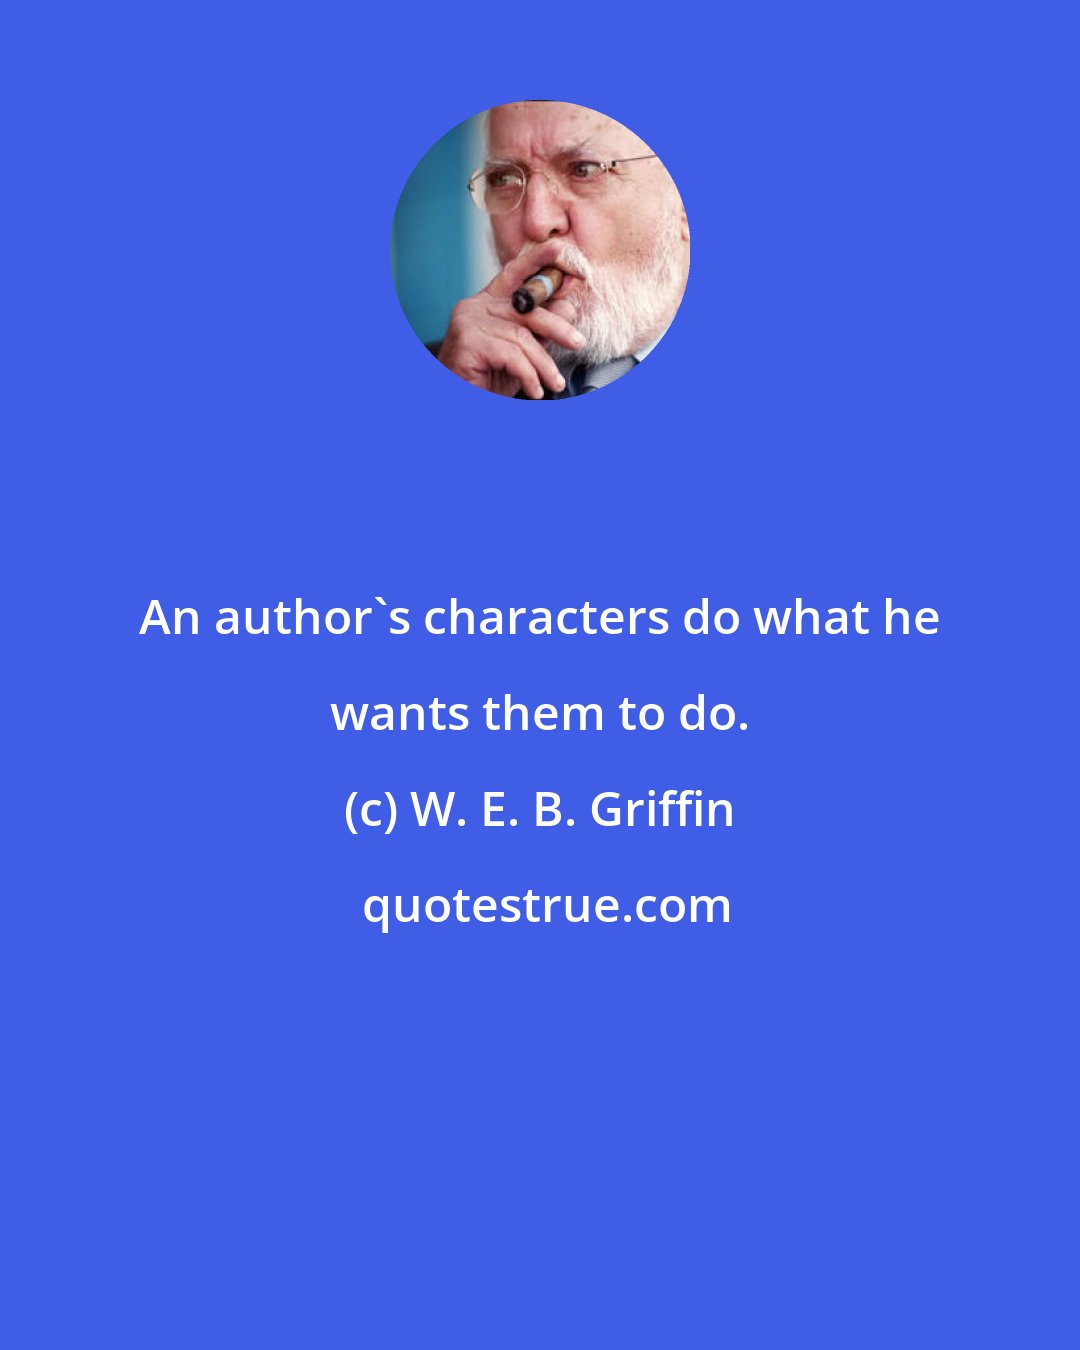 W. E. B. Griffin: An author's characters do what he wants them to do.